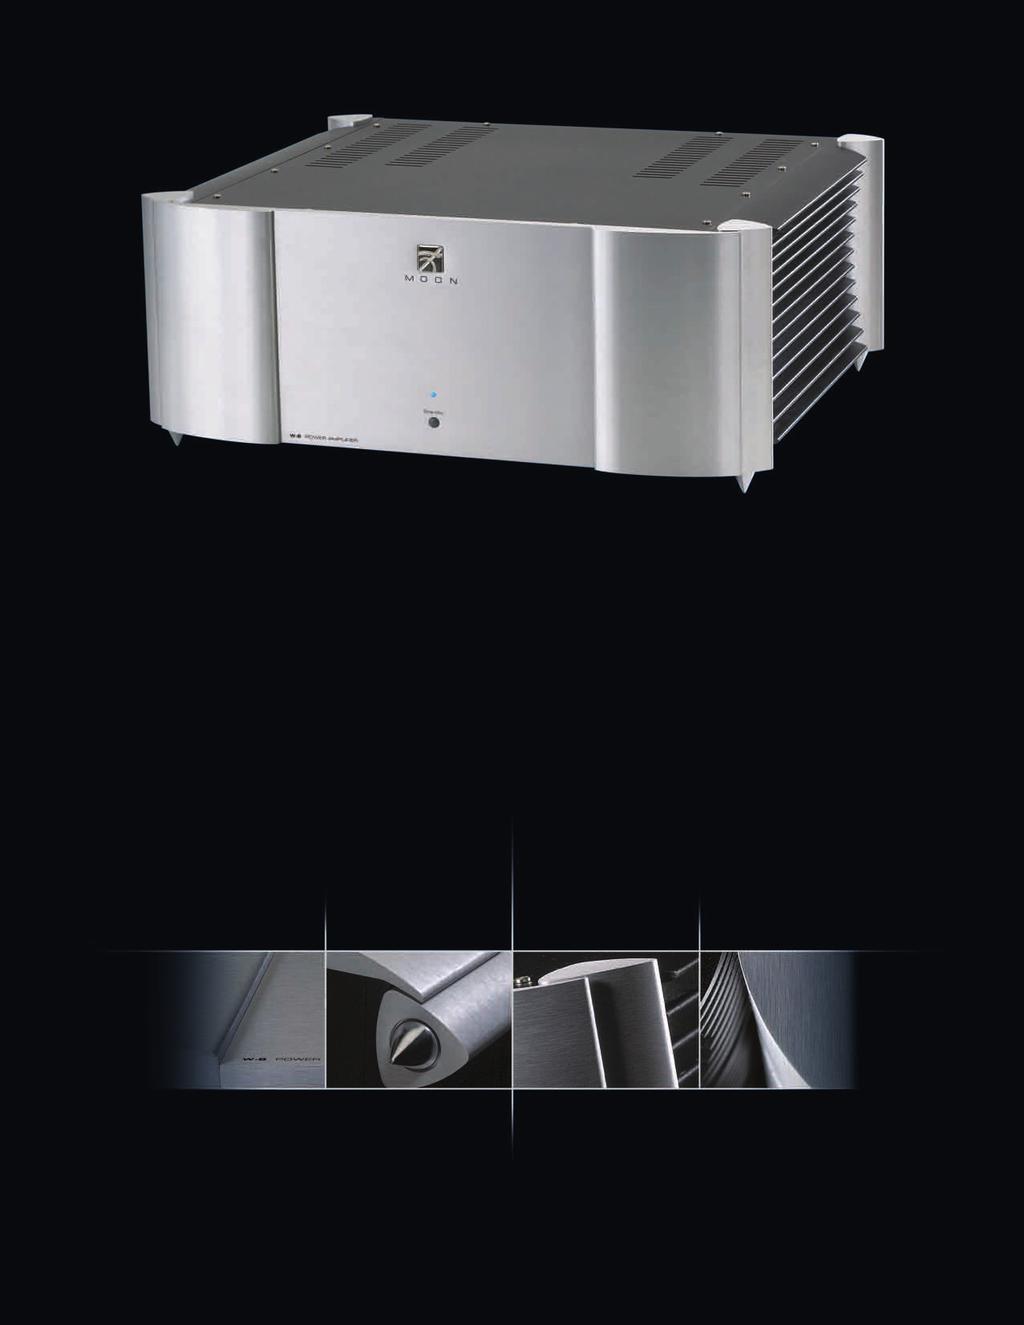 POWERFUL MOON W-8 Power Amplifier The MOON W-8 represents the pinnacle in power amplifier design.